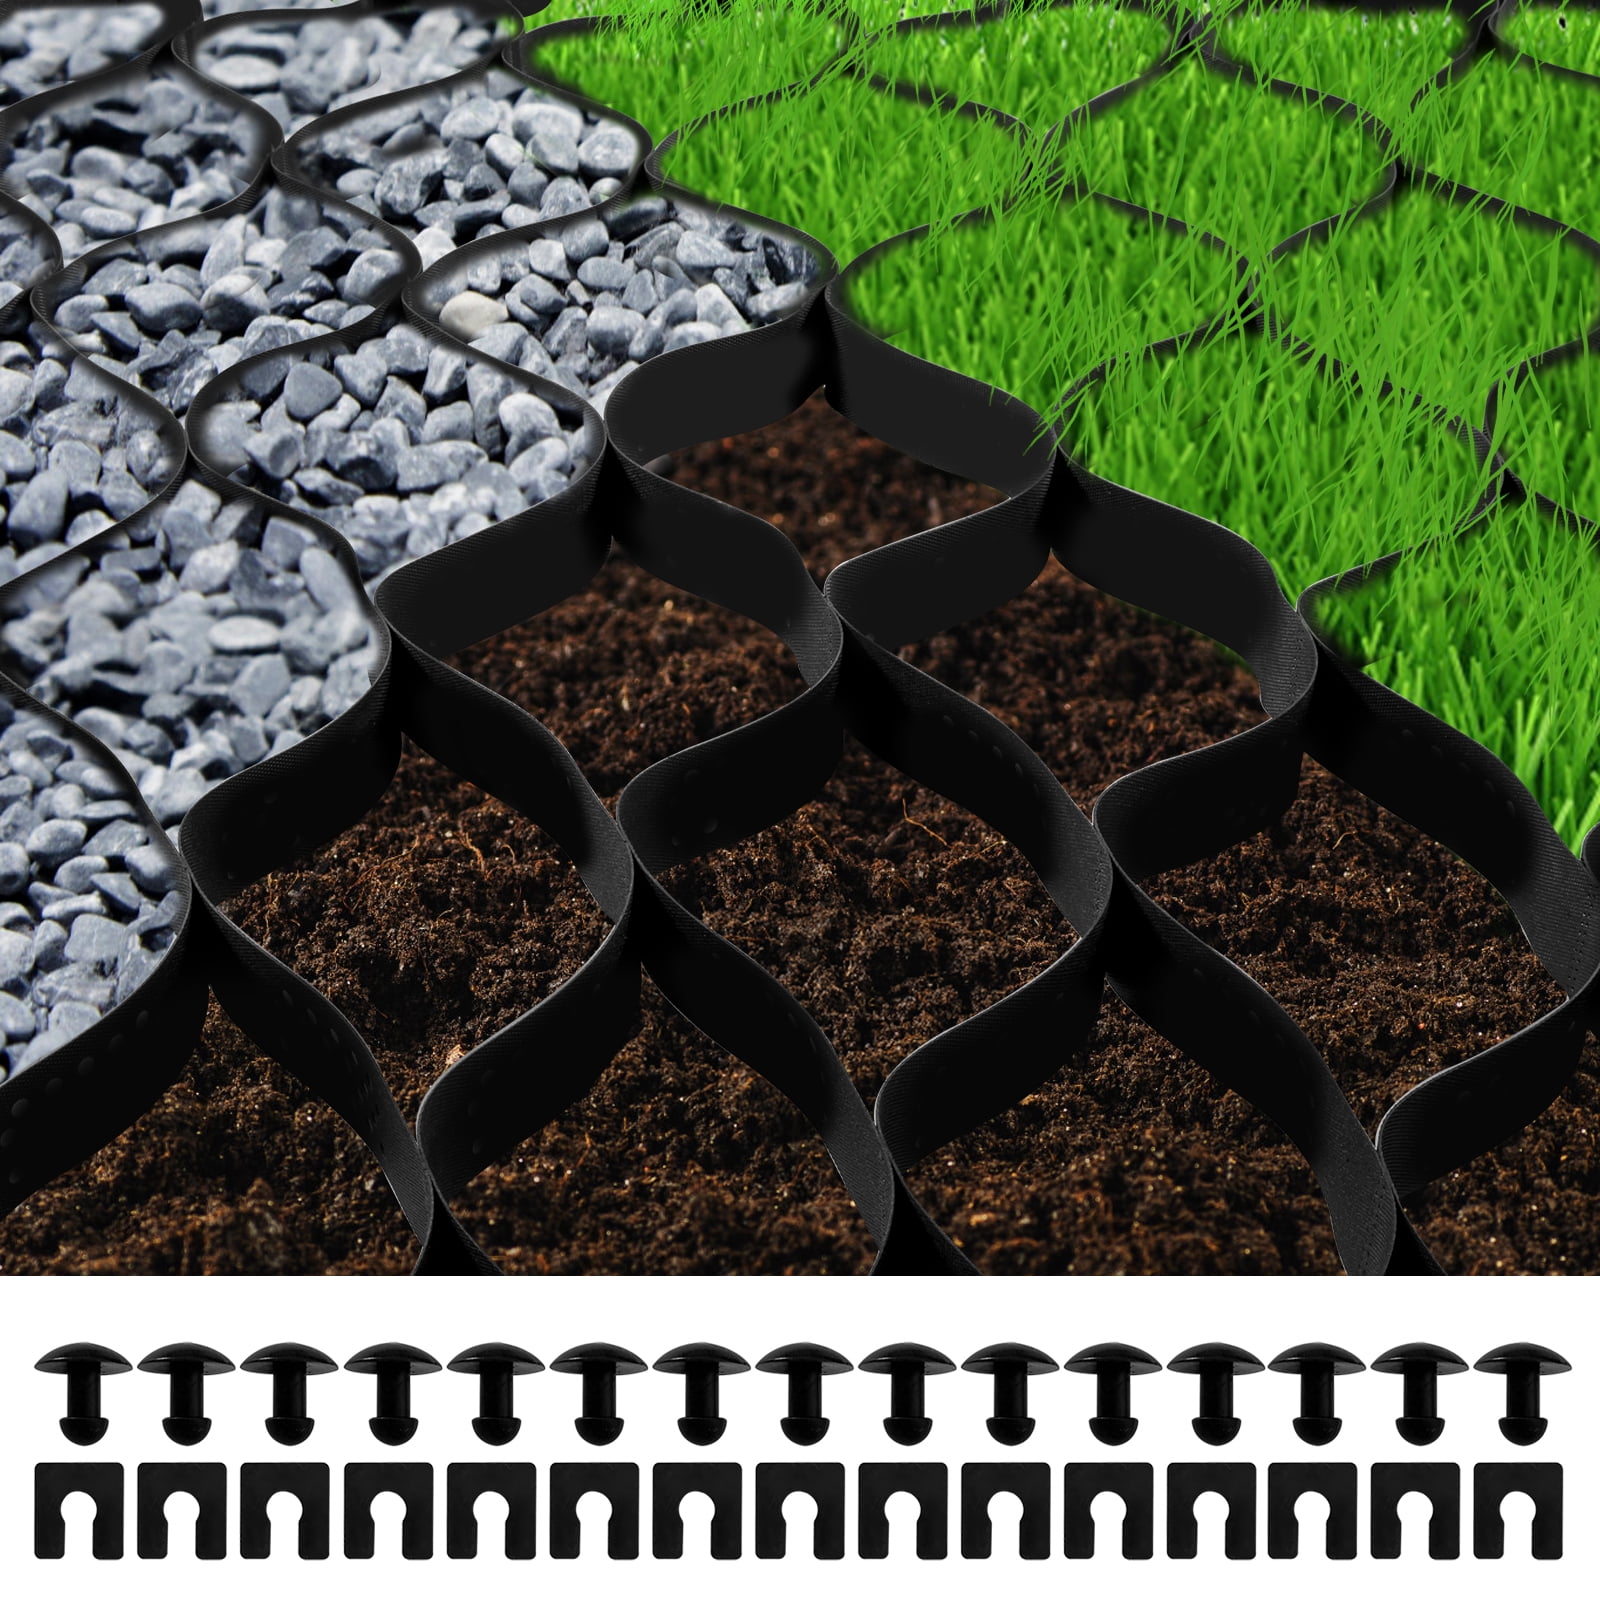 PACK OF 60 GRASS GRIDS DRIVEWAY DRAINAGE GRAVEL TURF SOIL PAVING LAWN SHED BASE 